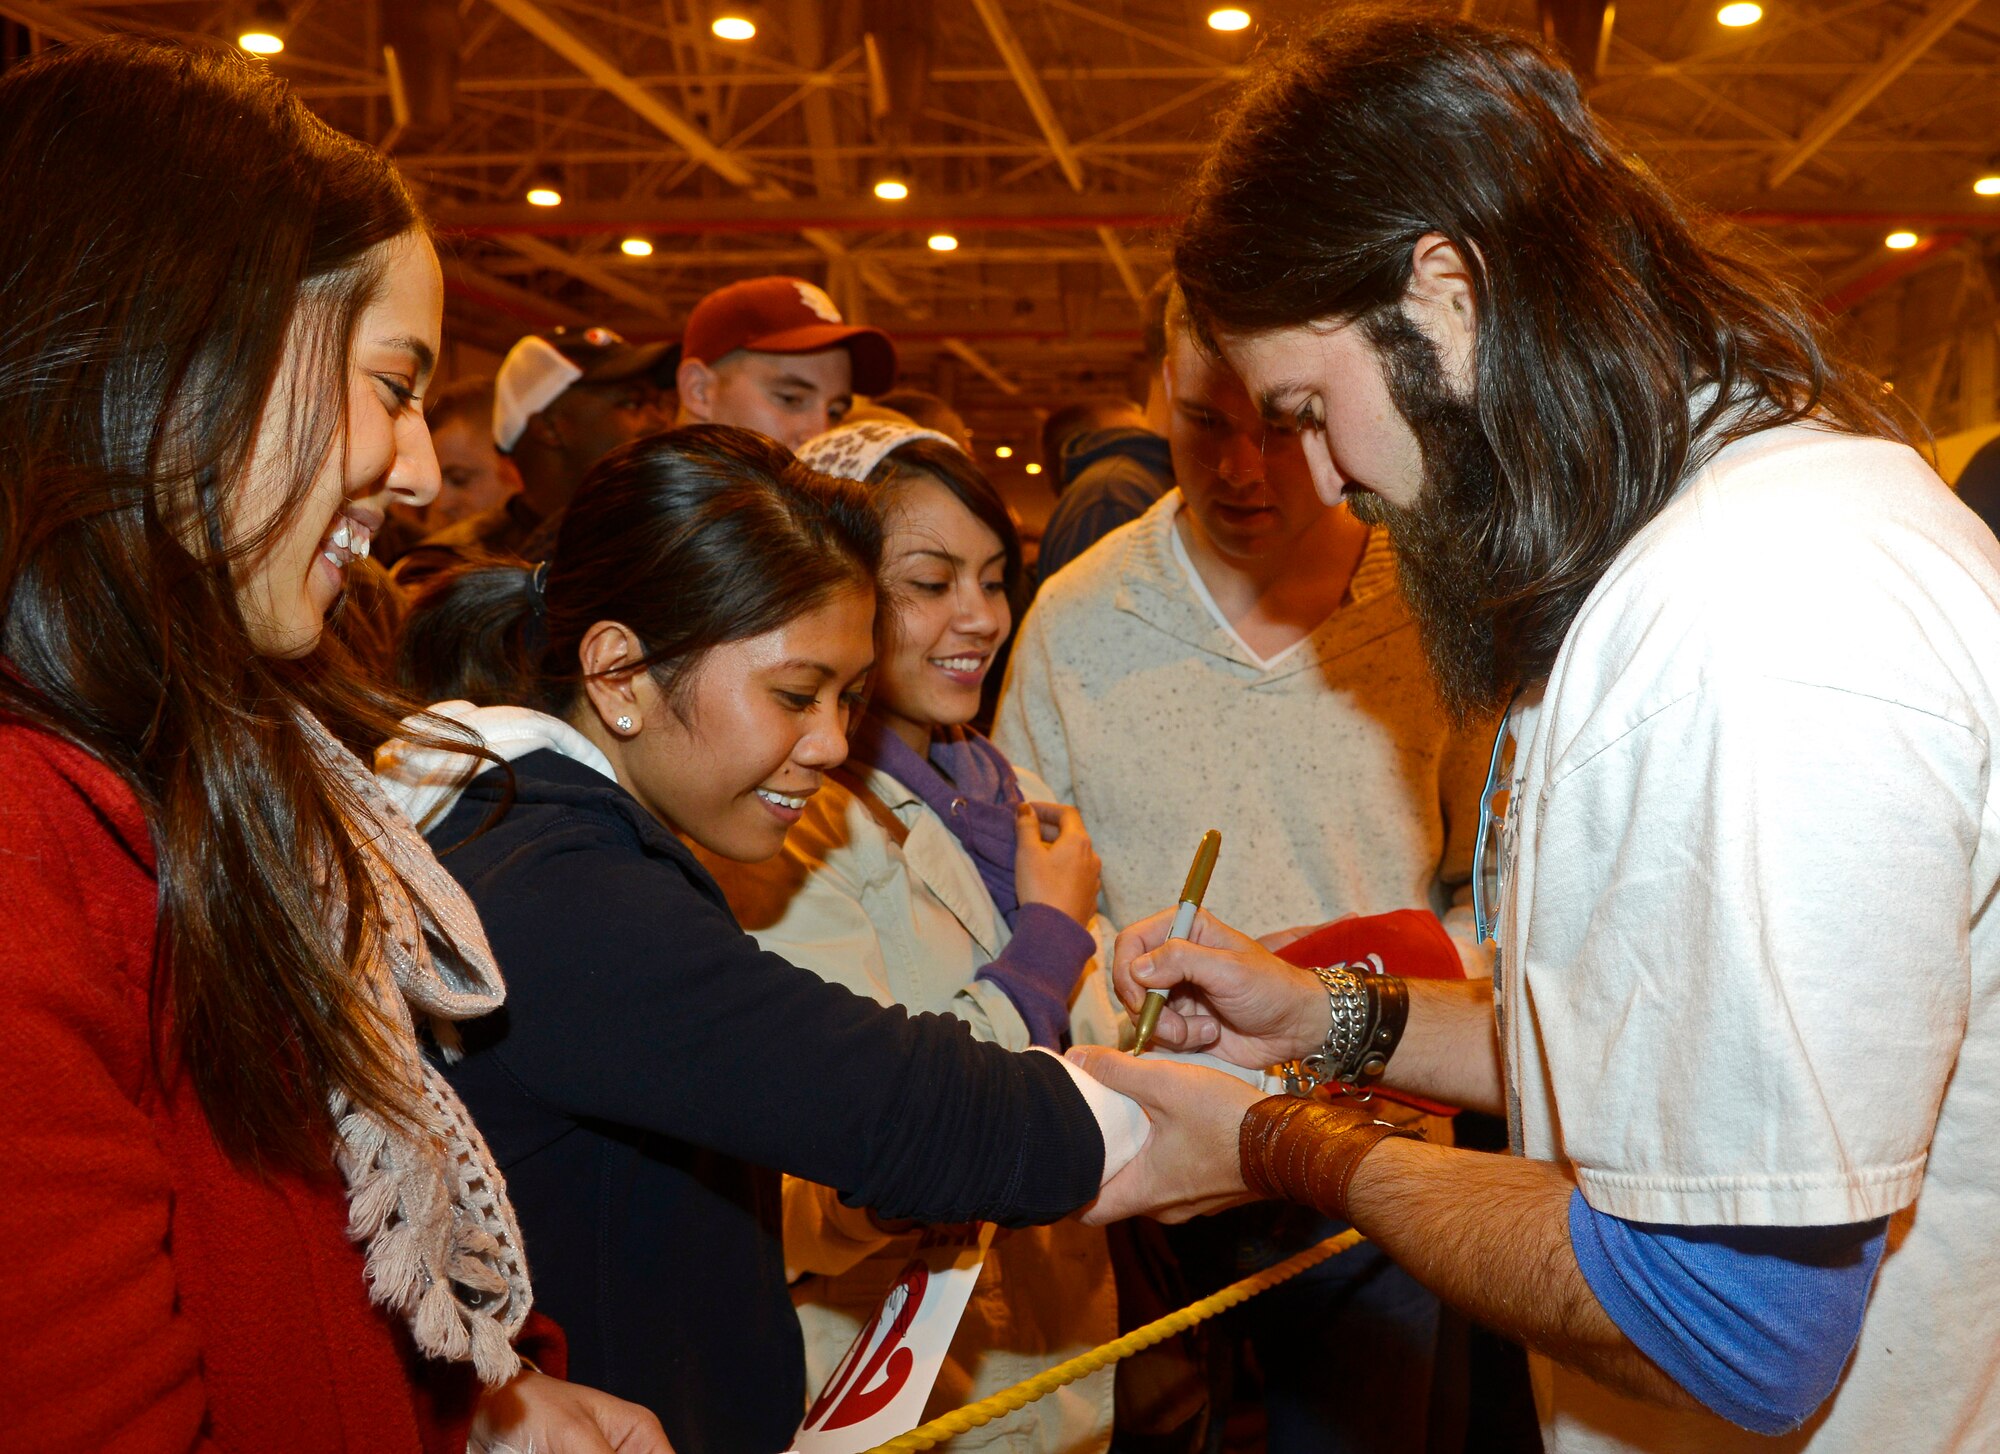 Jep Robertson, “Duck Dynasty” reality TV personality, signs autographs and takes photos with audience members during the United Services Organization’s Annual Chairman’s Holiday Tour, Dec. 11, 2013, at Aviano Air Base, Italy.  The USO brought several celebrities from the sports, TV and music industry to entertain and show appreciation to the troops.  (U.S. Air Force photo/ Airman 1st Class Deana Heitzman)